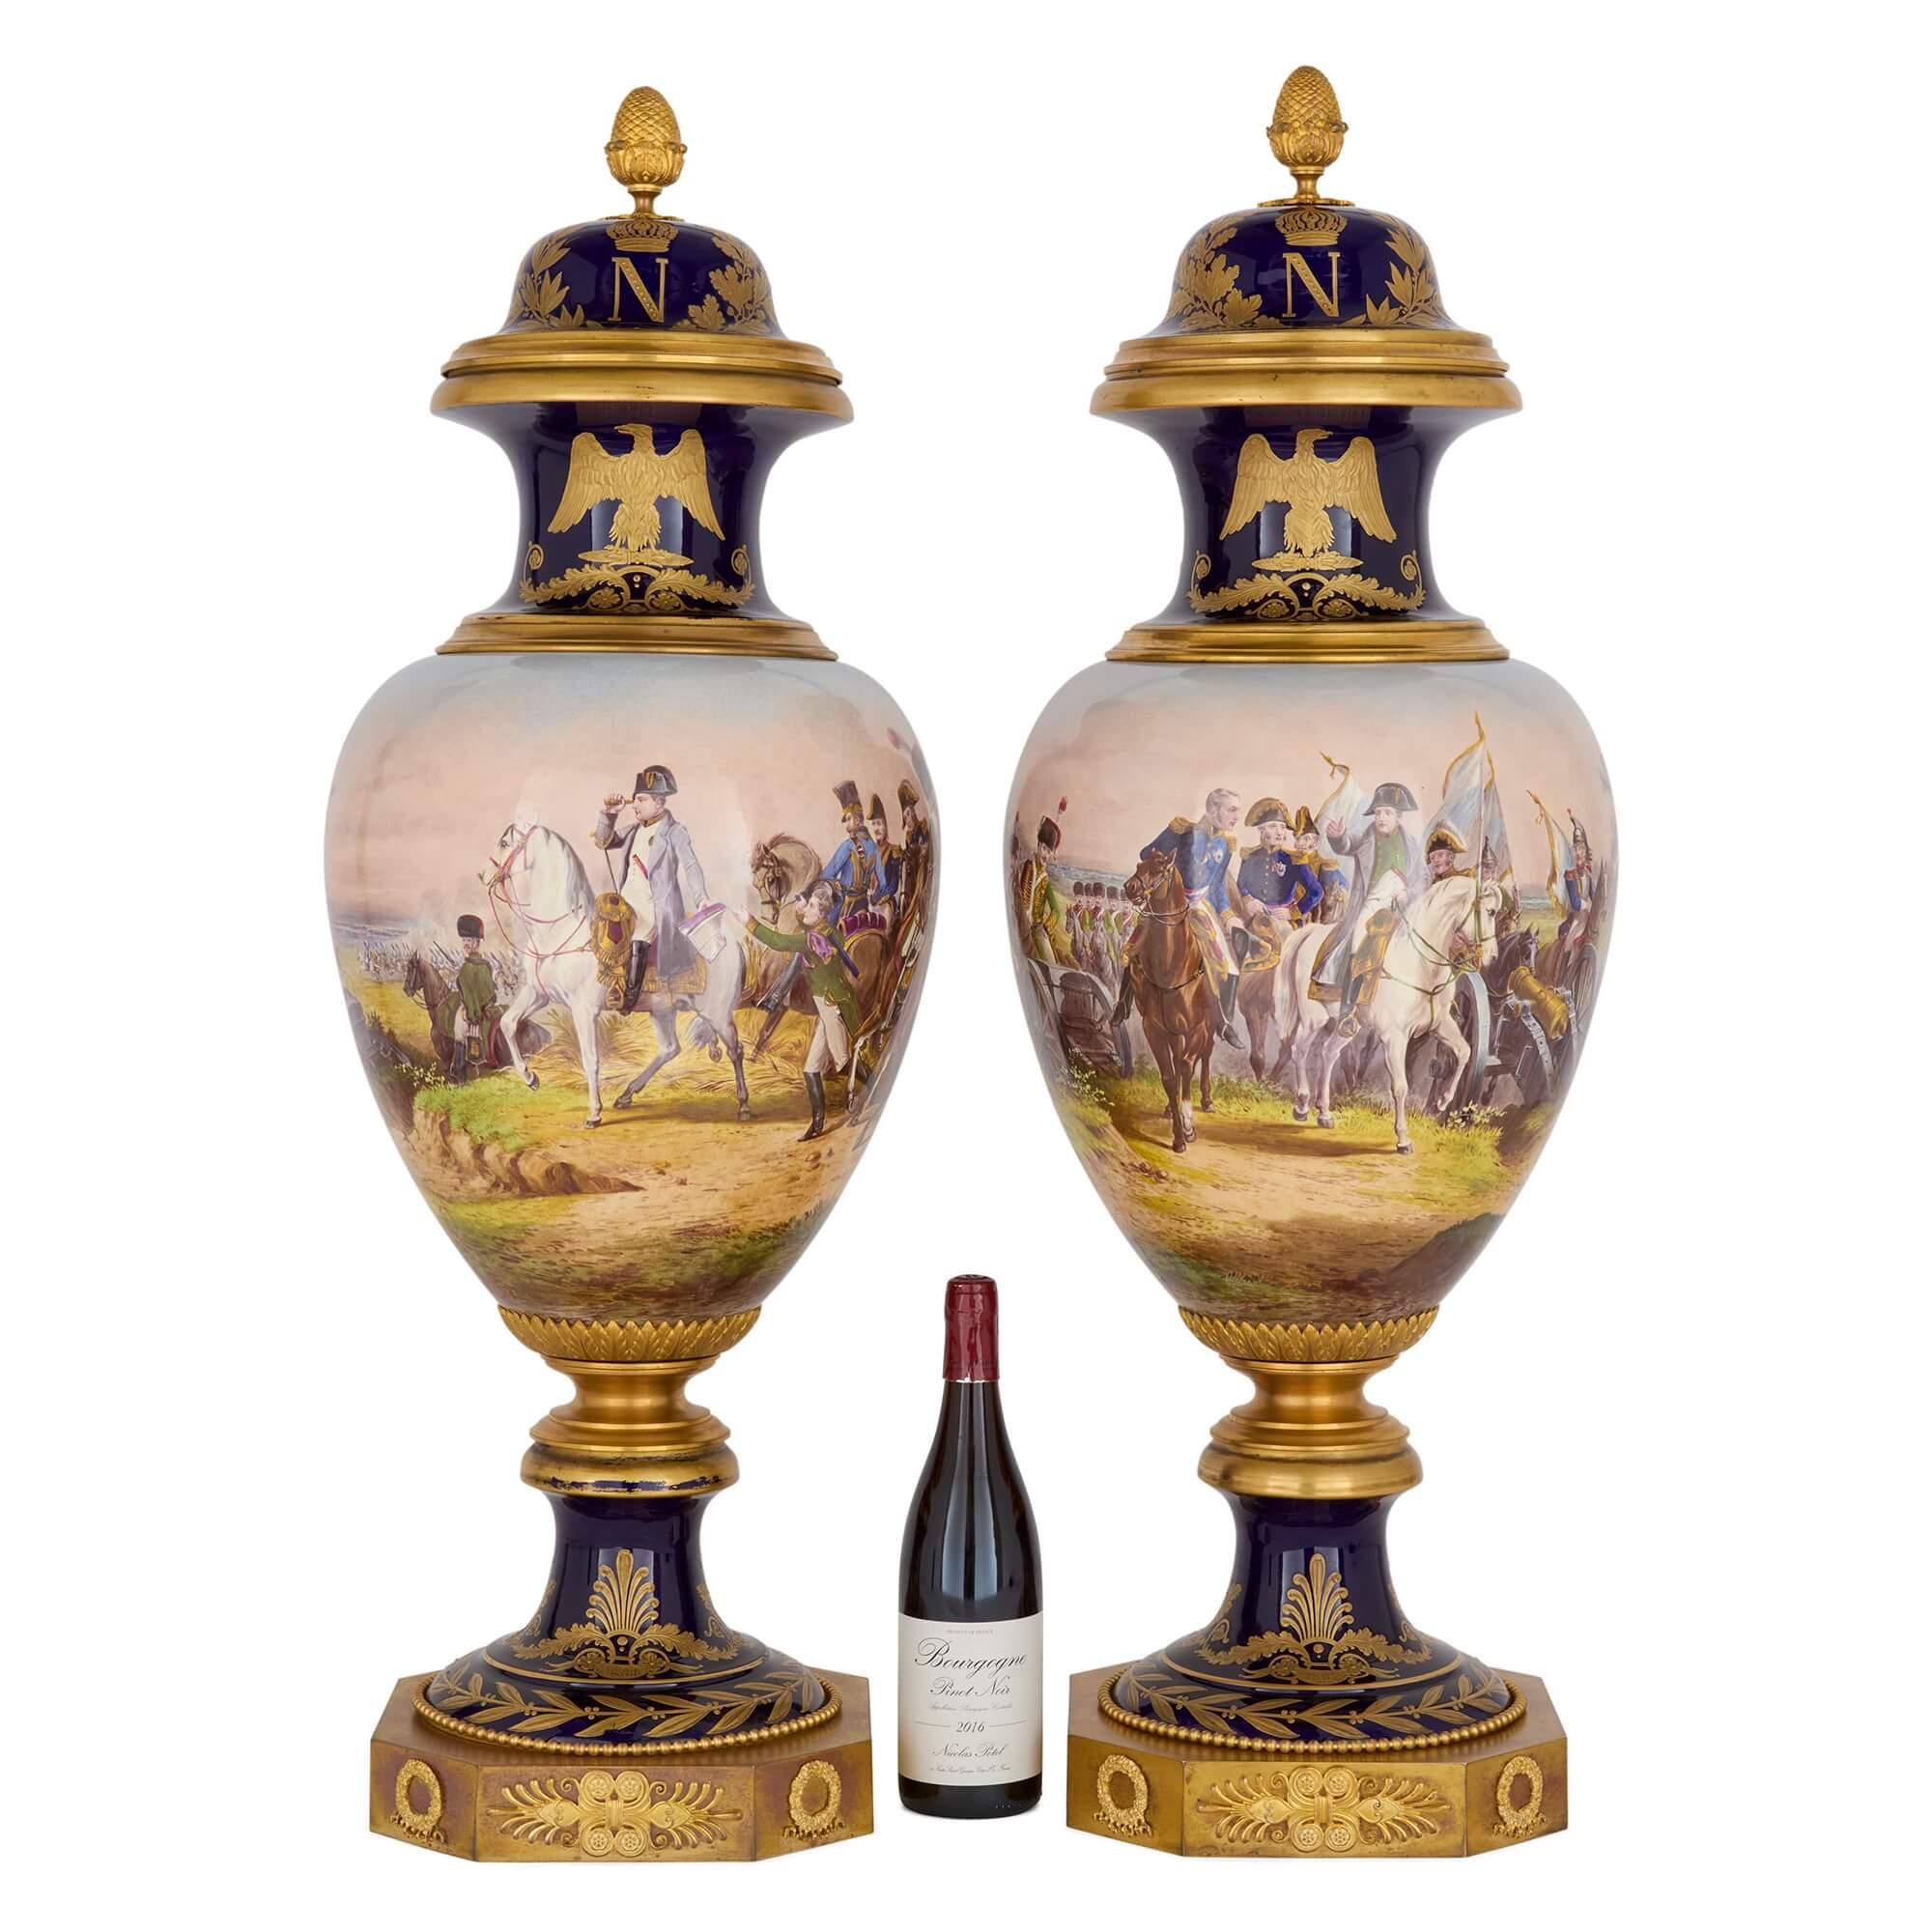 Large Pair of Sèvres-Style Porcelain Napoleonic Vases with Ormolu Mounts For Sale 6